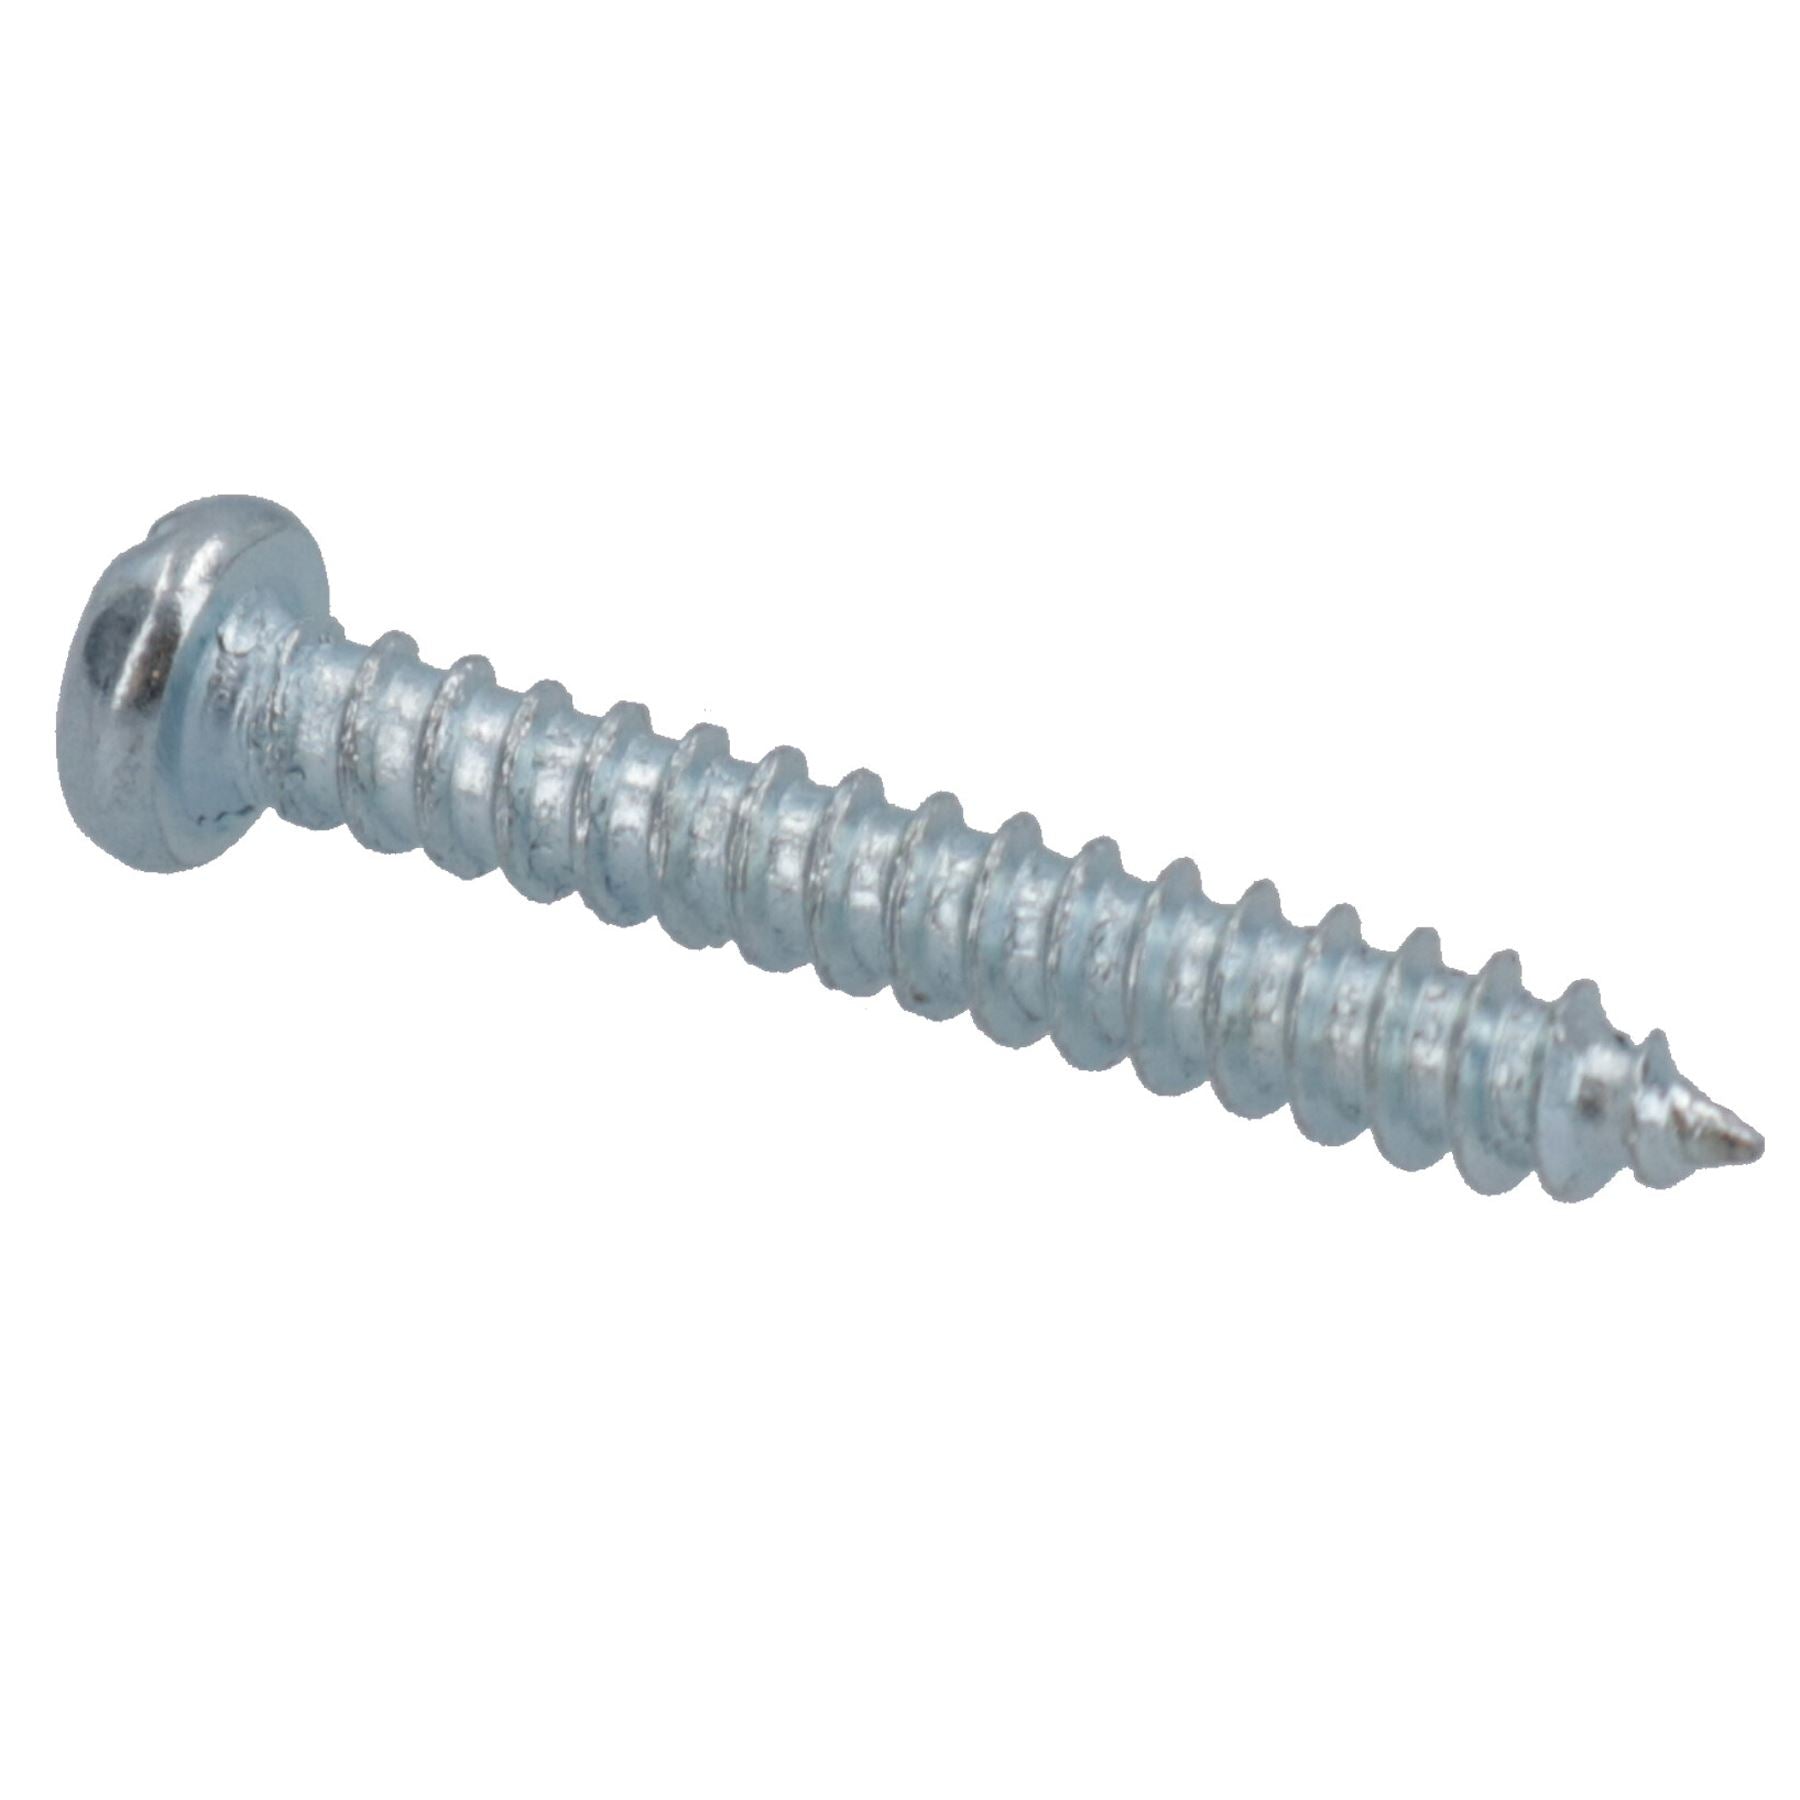 Self Tapping Screws PH2 Drive 3.5mm (width) x 25mm (length) Fasteners